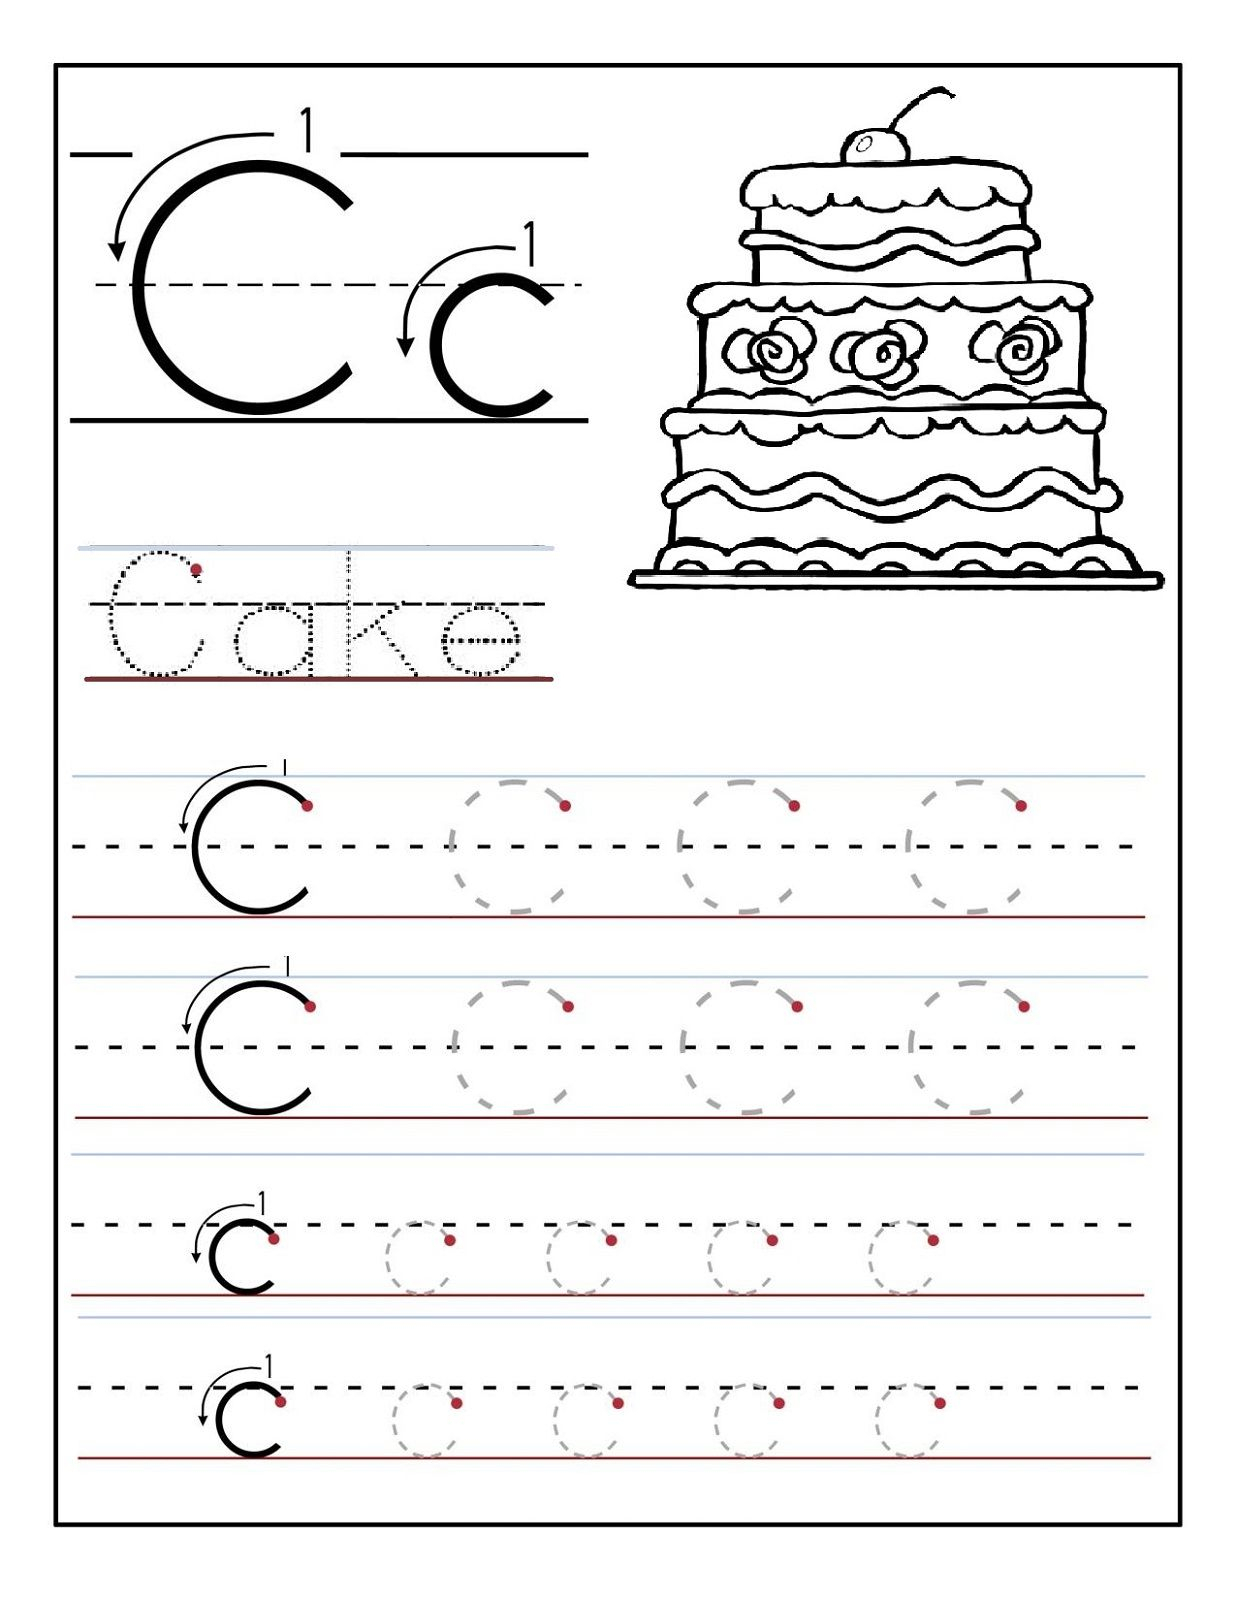 Trace The Letter C Worksheets | Preschool Worksheets, Letter throughout Trace Letter C Worksheets Preschool